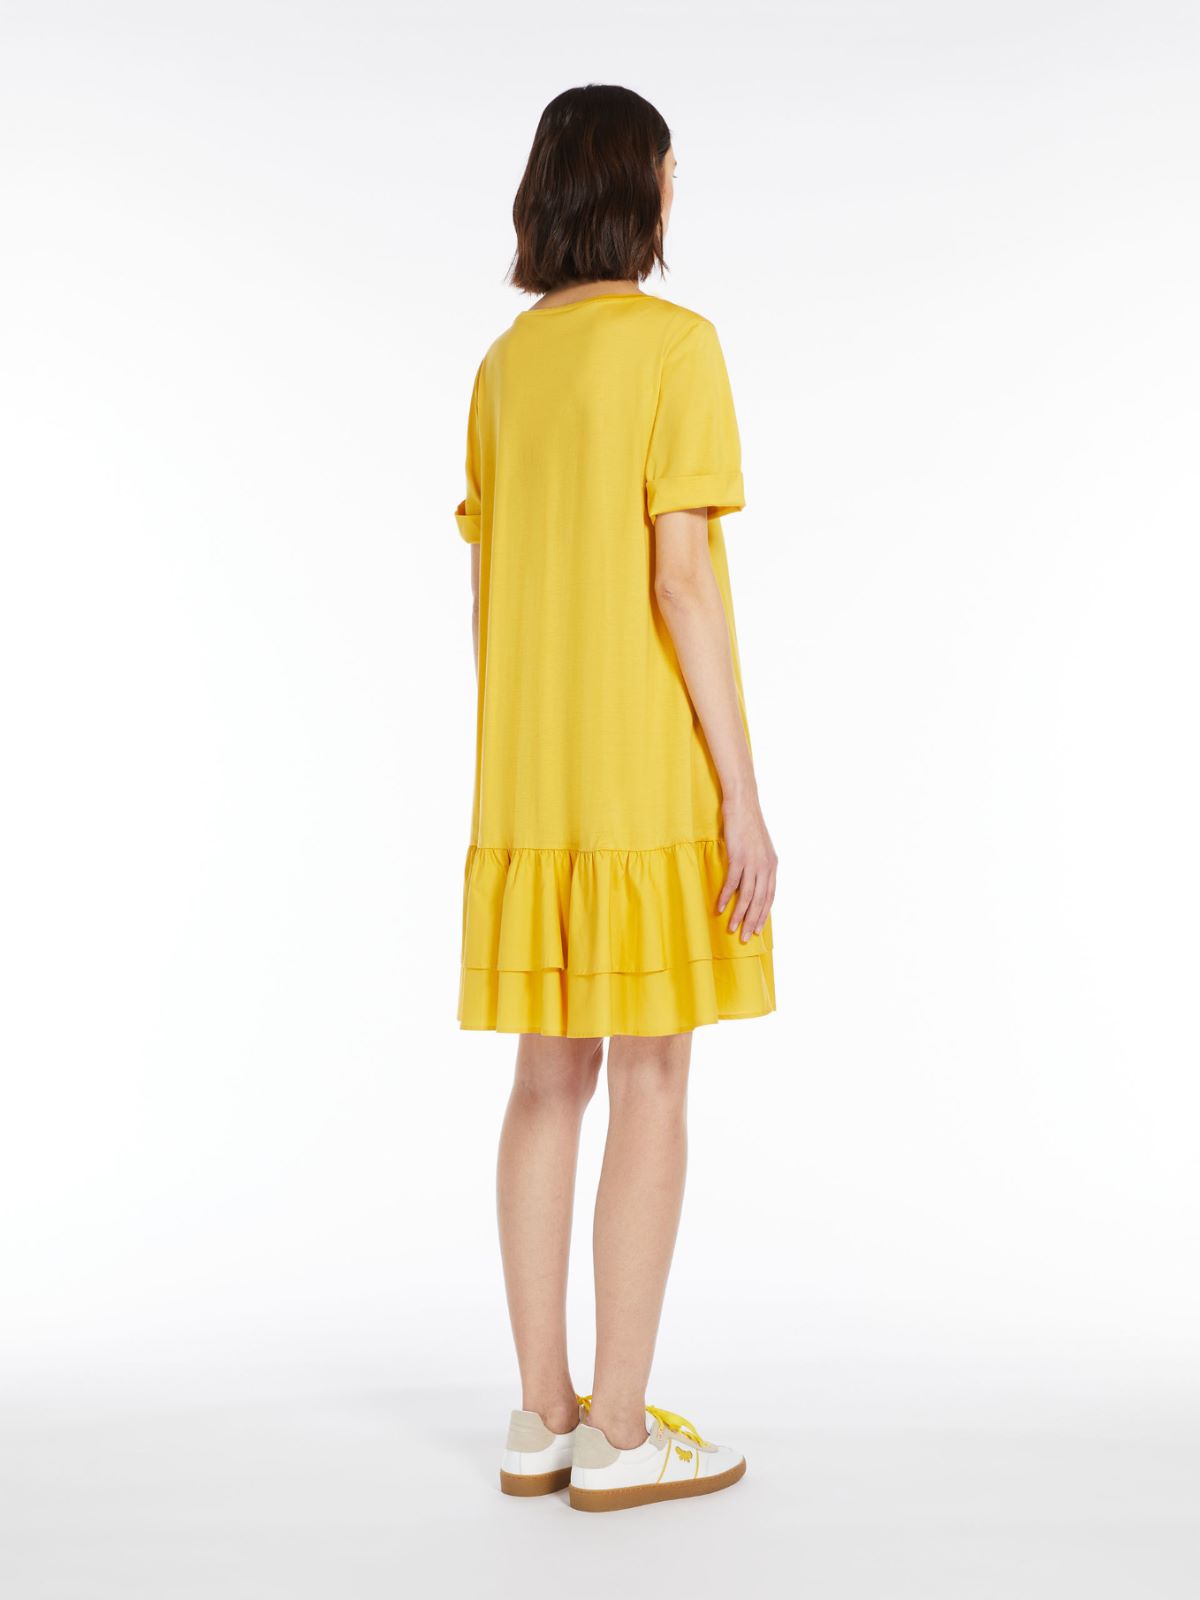 Dress in cotton jersey  - BRIGHT YELLOW - Weekend Max Mara - 3